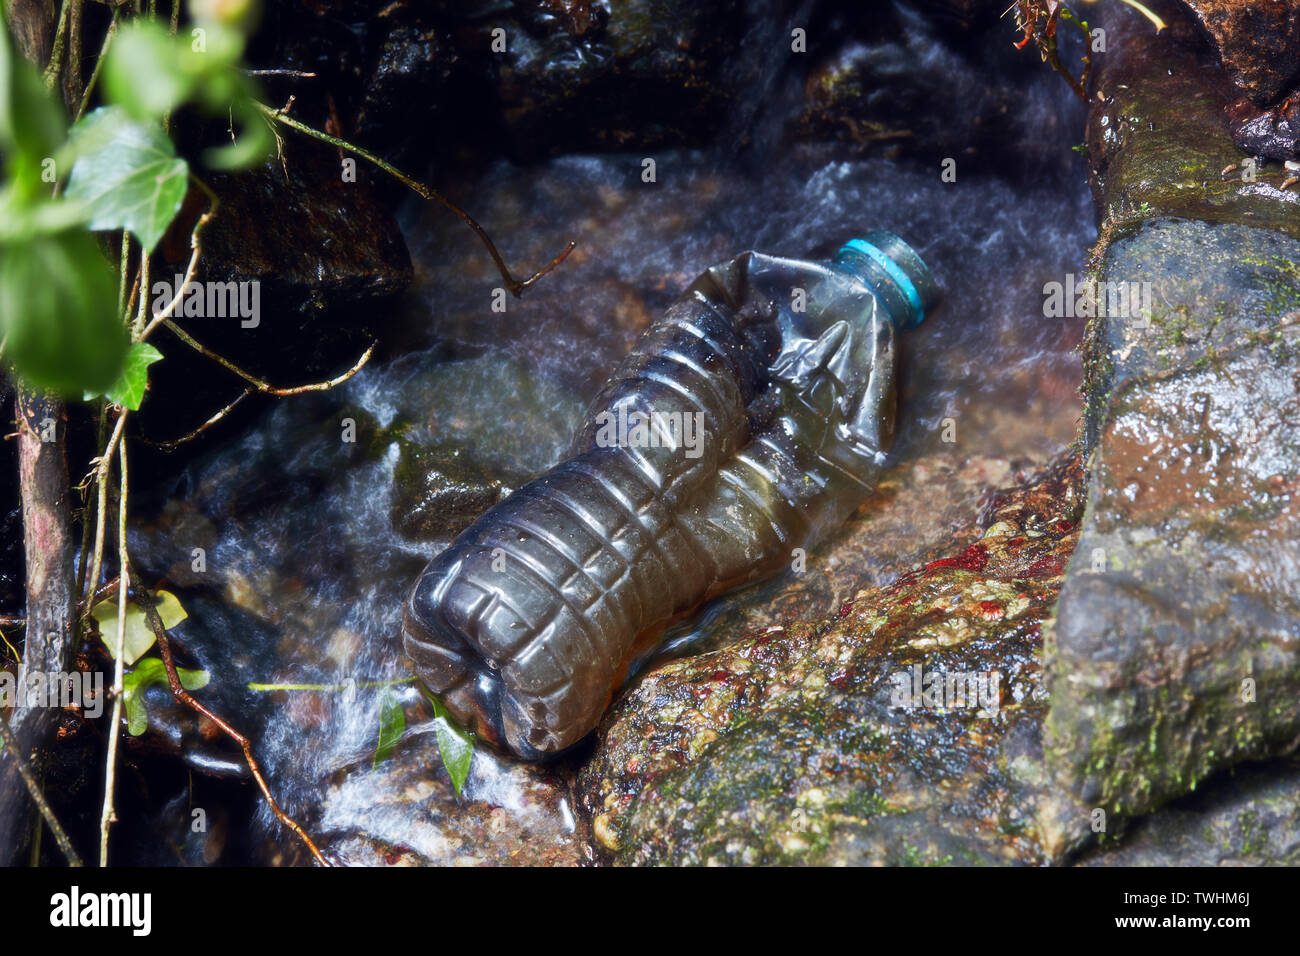 Plastic bottle found in waterfall Stock Photo